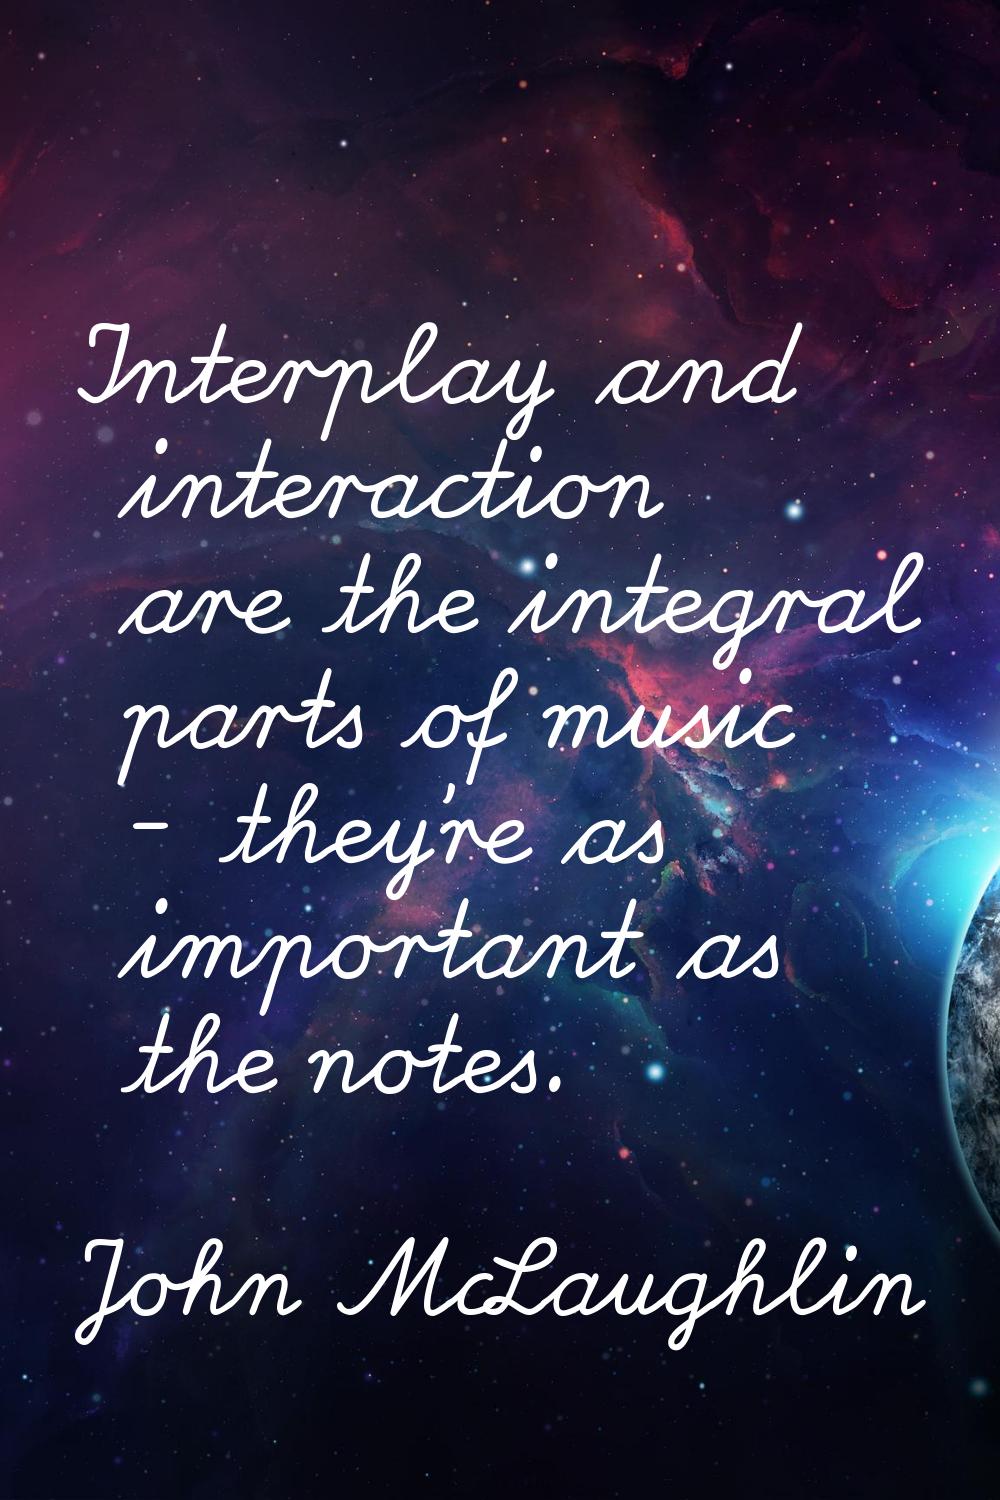 Interplay and interaction are the integral parts of music - they're as important as the notes.